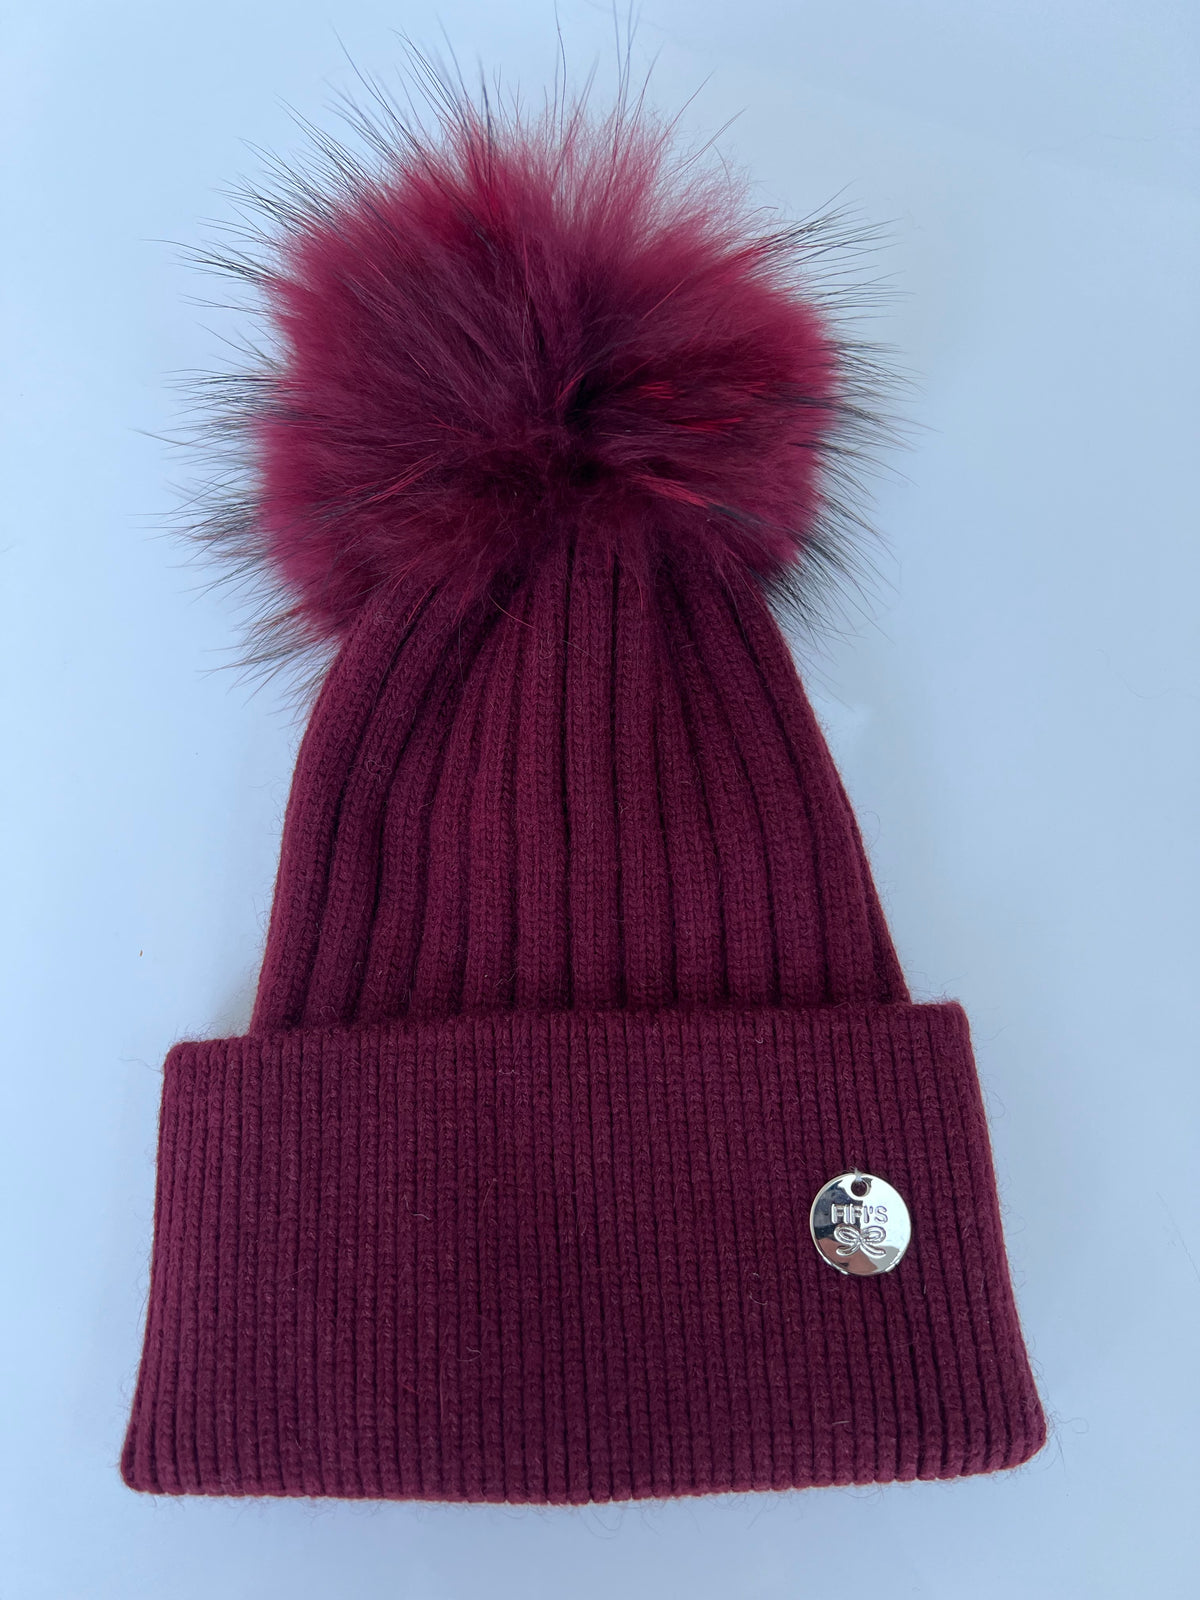 Cashmere single - Maroon with matching fur pom